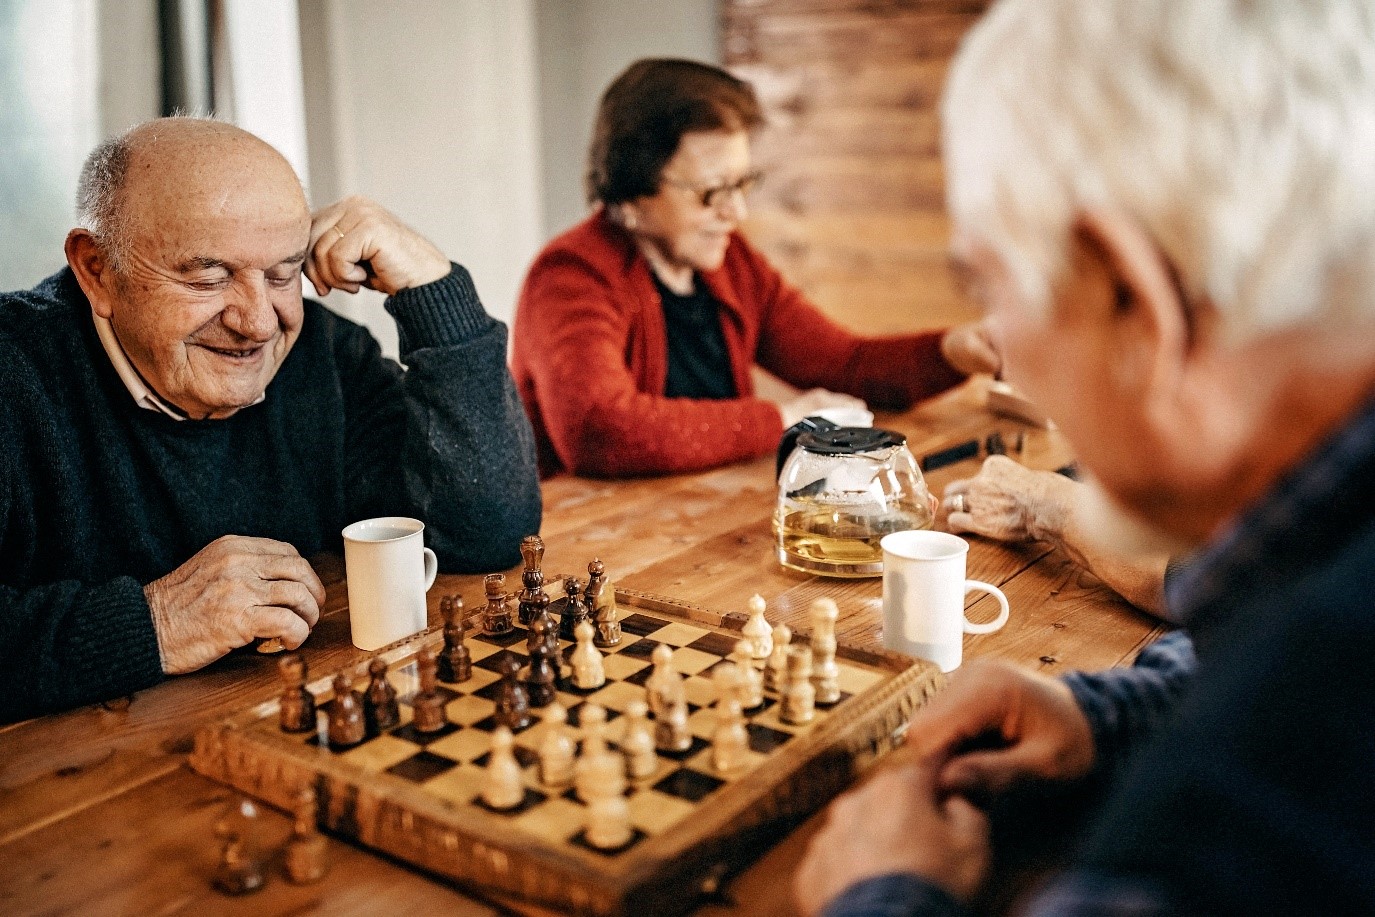 Two people playing chess at wooden table